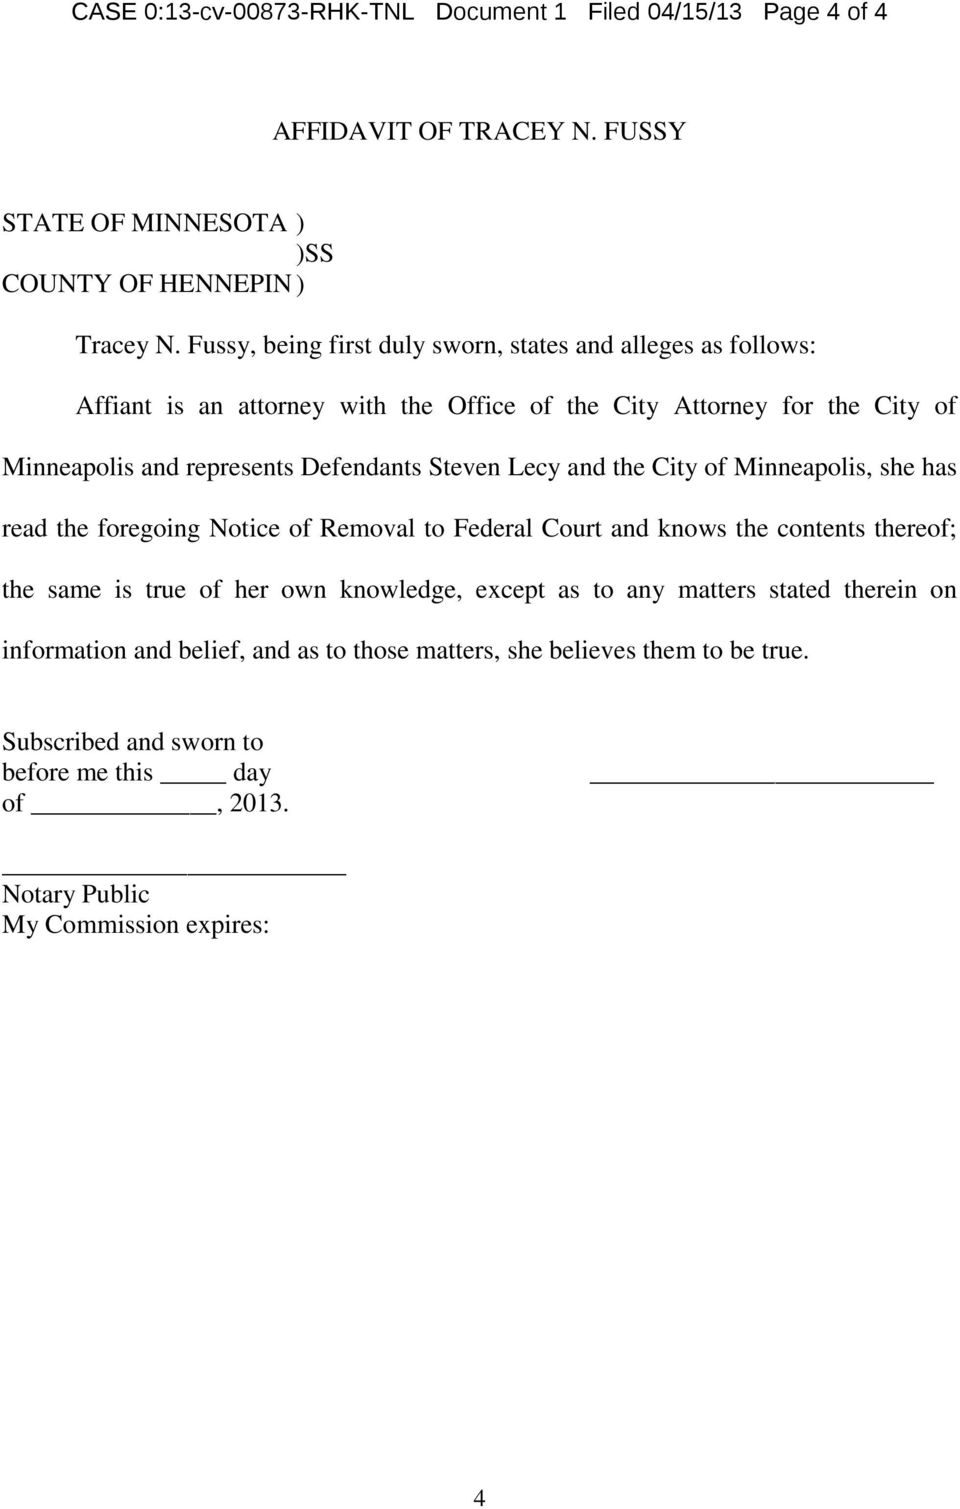 Steven Lecy and the City of Minneapolis, she has read the foregoing Notice of Removal to Federal Court and knows the contents thereof; the same is true of her own knowledge,